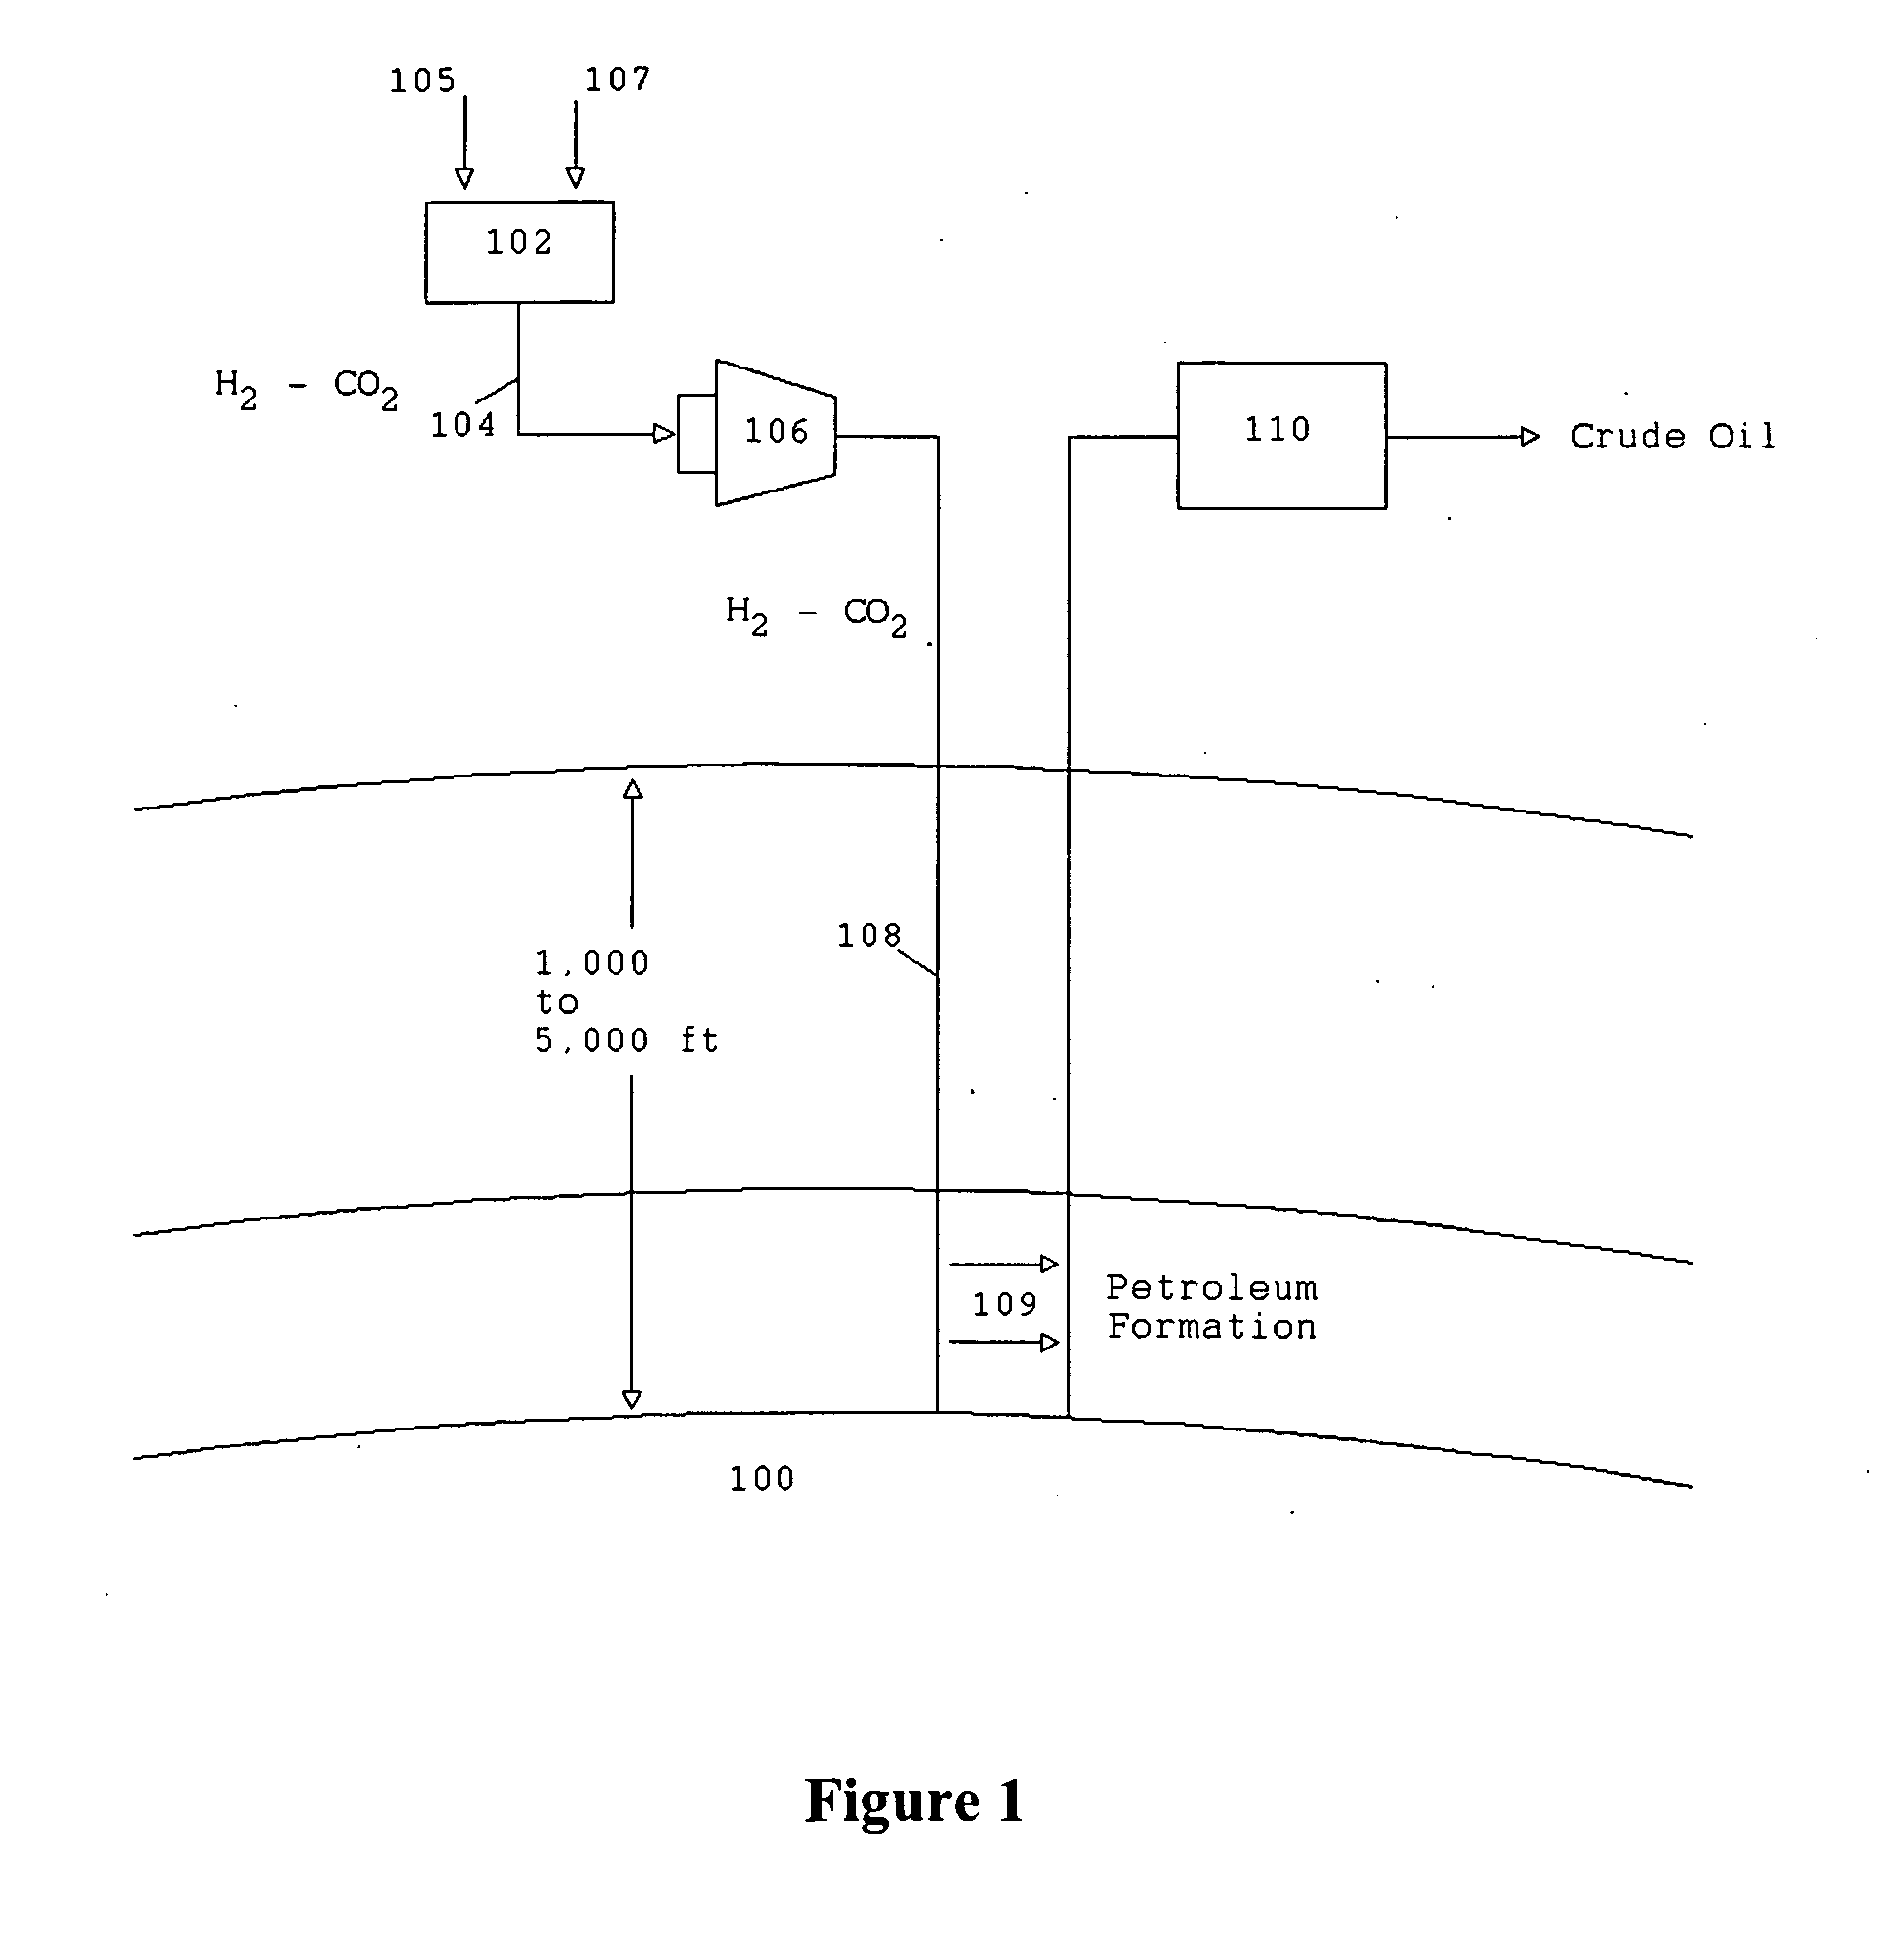 Apparatus and Method for Extracting Petroleum from Underground Sites Using Reformed Gases